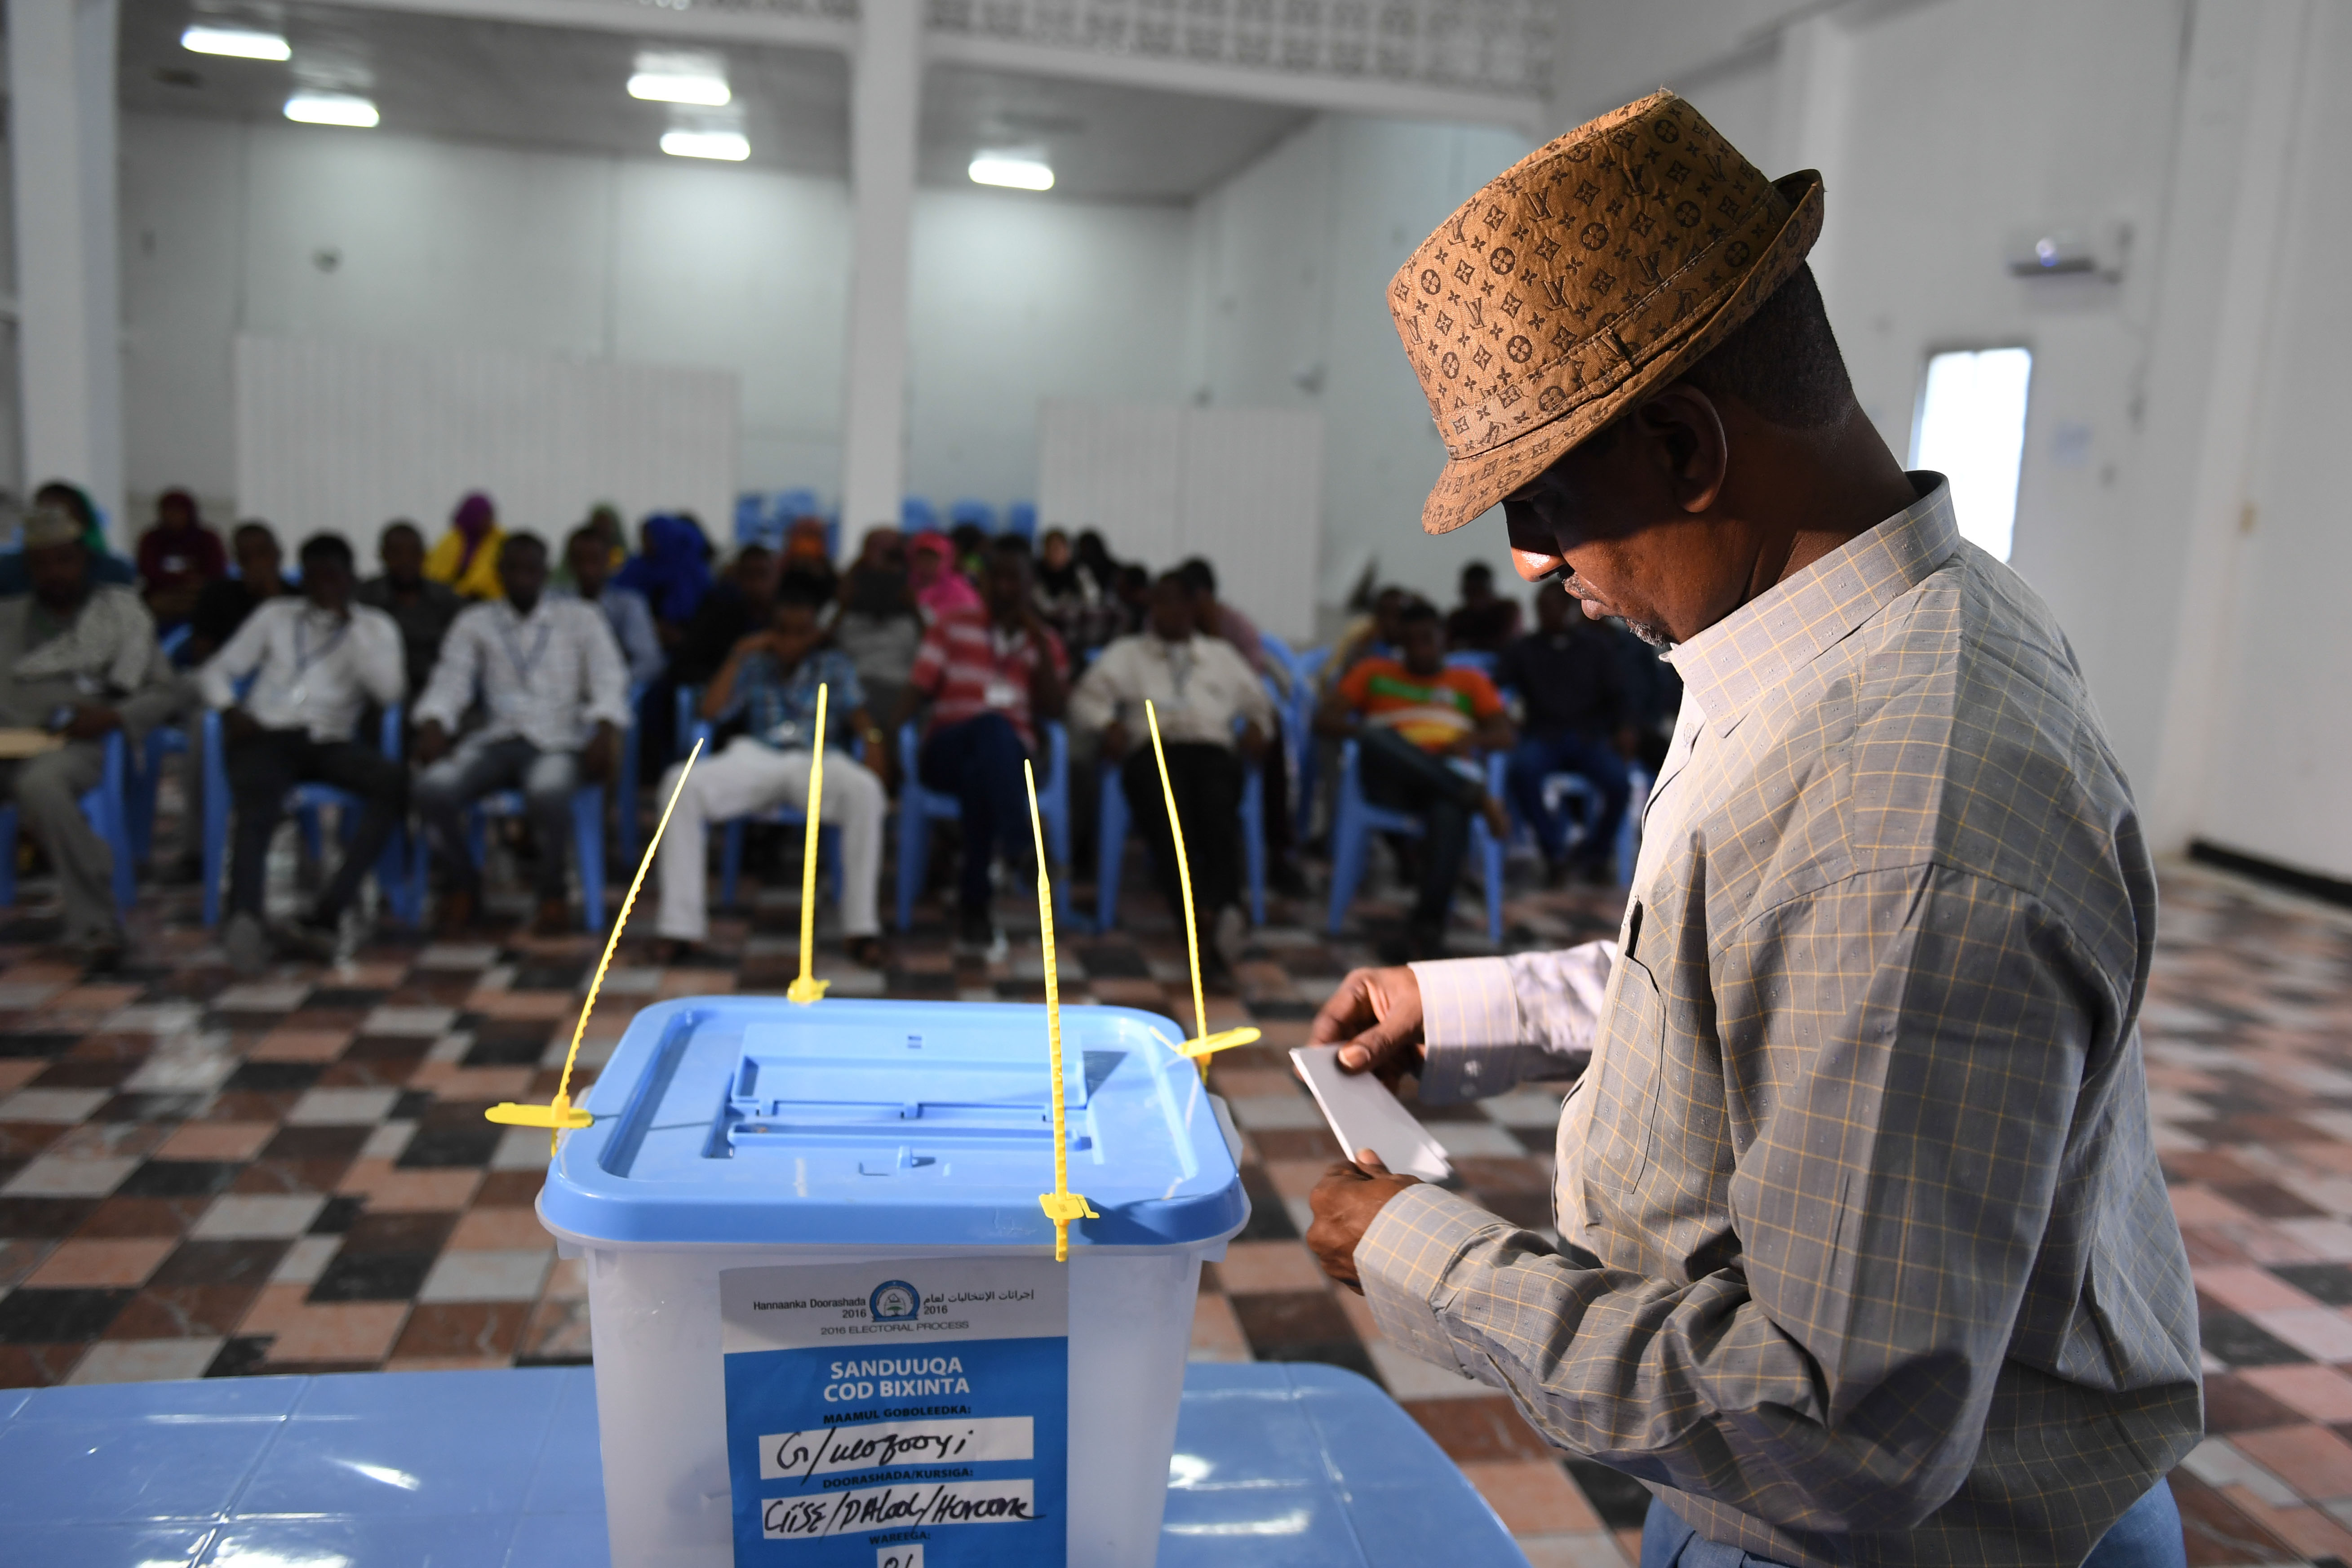 A delegate from Somaliland votes during the electoral process in Mogadishu, Somalia, on 19 December 2016. (<a href="https://www.flickr.com/photos/au_unistphotostream/30932740883/" target="_blank">Photo by Ilyas Ahmed</a> / AMISOM / Public domain)